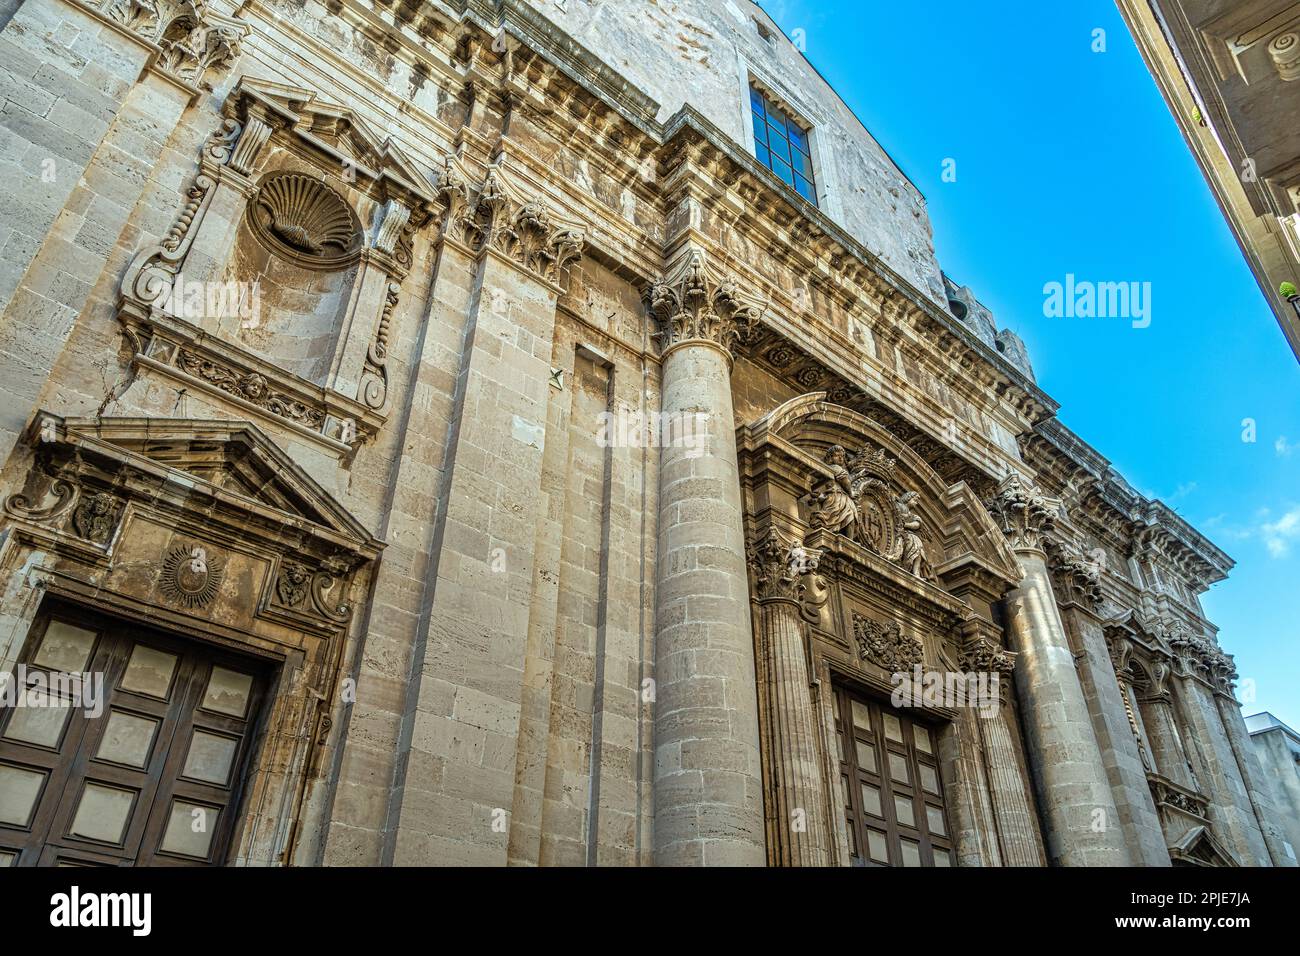 The church of the Jesuit College has a beautiful Baroque facade divided into two orders. Syracuse, Sicily, Italy, Europe Stock Photo